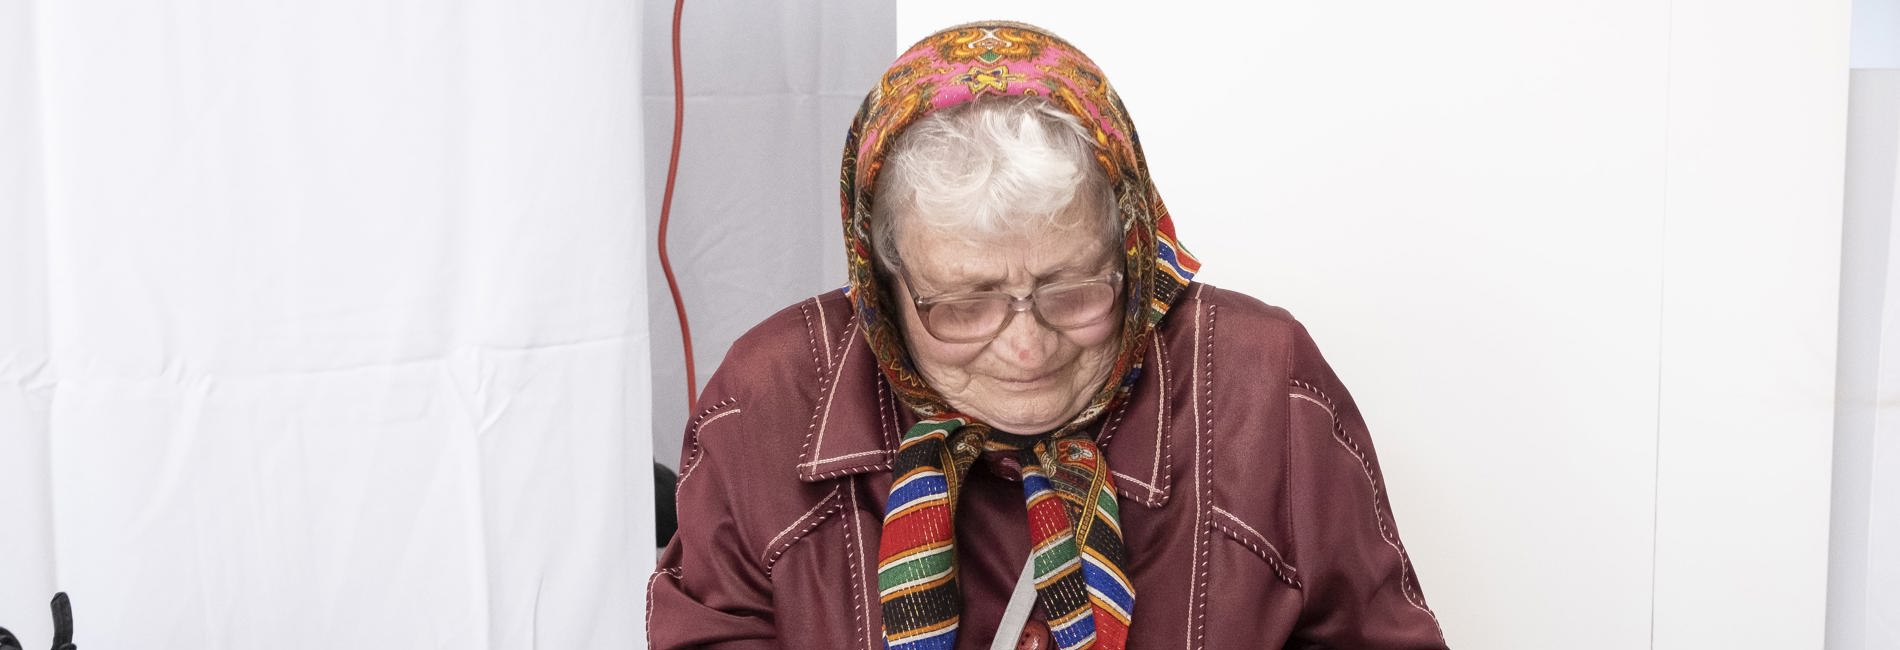 Liubov Suhai, 80, fled her village outside Kyiv, the Ukrainian capital, on 16 March and is now living with her daughter Larysa in Warsaw